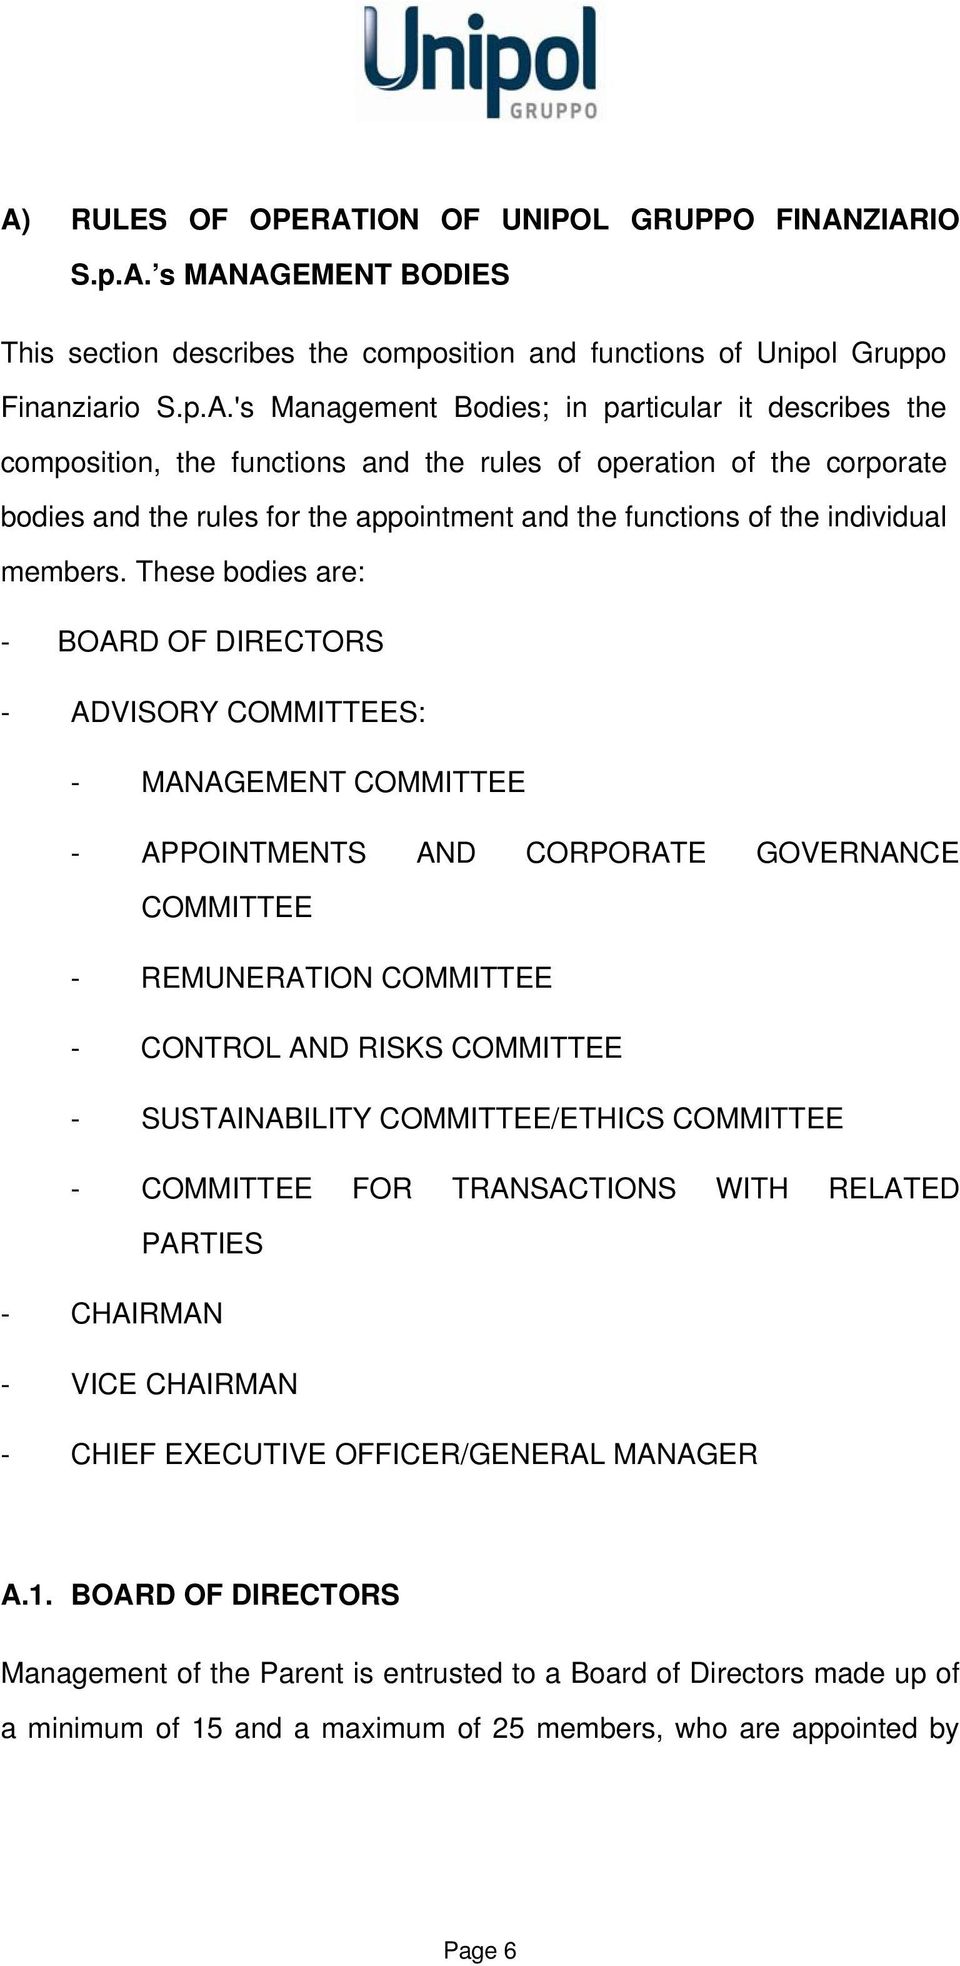 These bodies are: - BOARD OF DIRECTORS - ADVISORY COMMITTEES: - MANAGEMENT COMMITTEE - APPOINTMENTS AND CORPORATE GOVERNANCE COMMITTEE - REMUNERATION COMMITTEE - CONTROL AND RISKS COMMITTEE -